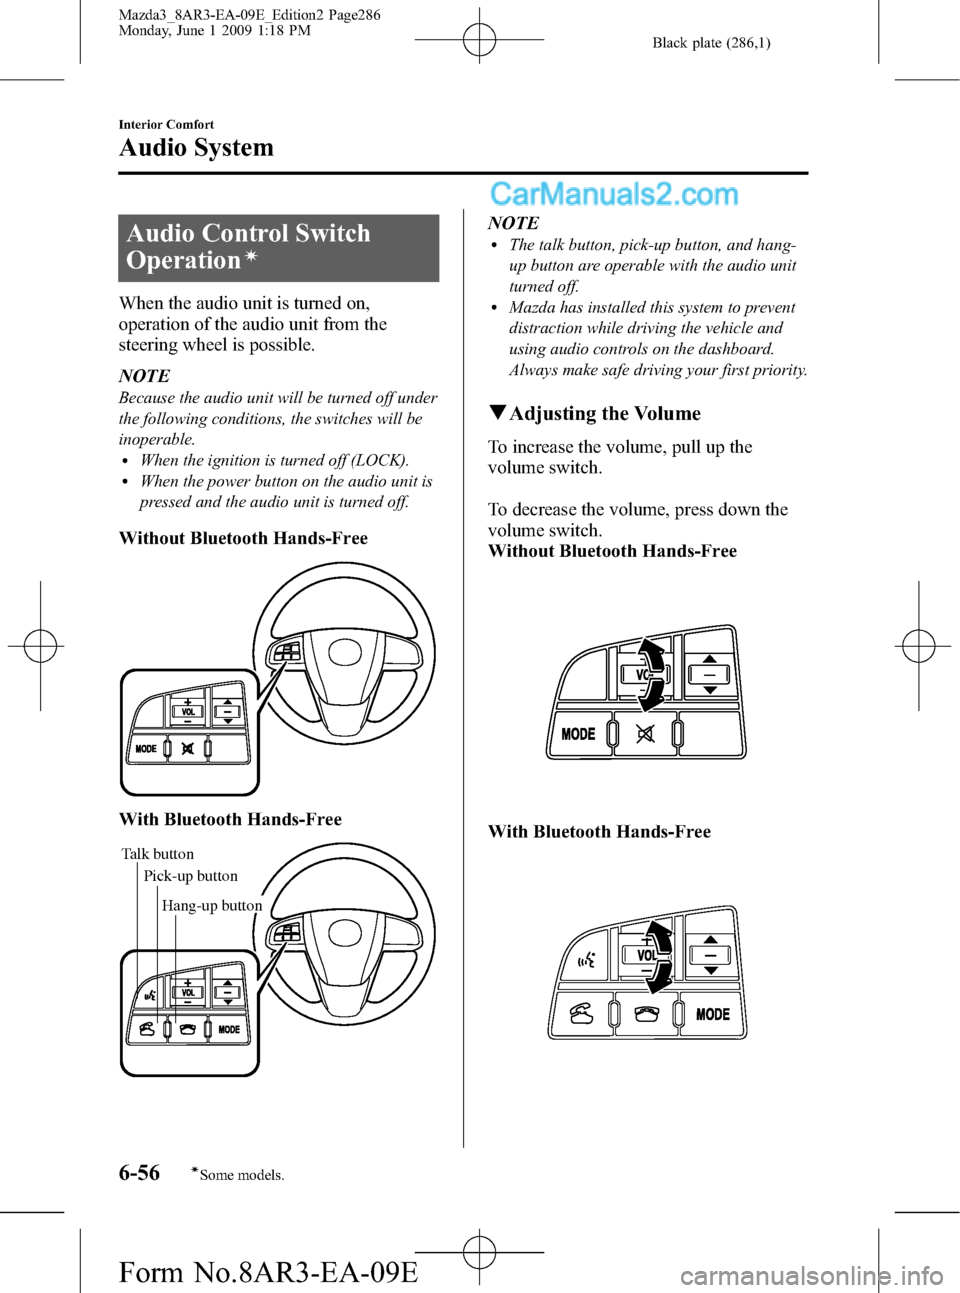 MAZDA MODEL MAZDASPEED 3 2010  Owners Manual (in English) Black plate (286,1)
Audio Control Switch
Operation
í
When the audio unit is turned on,
operation of the audio unit from the
steering wheel is possible.
NOTE
Because the audio unit will be turned off 